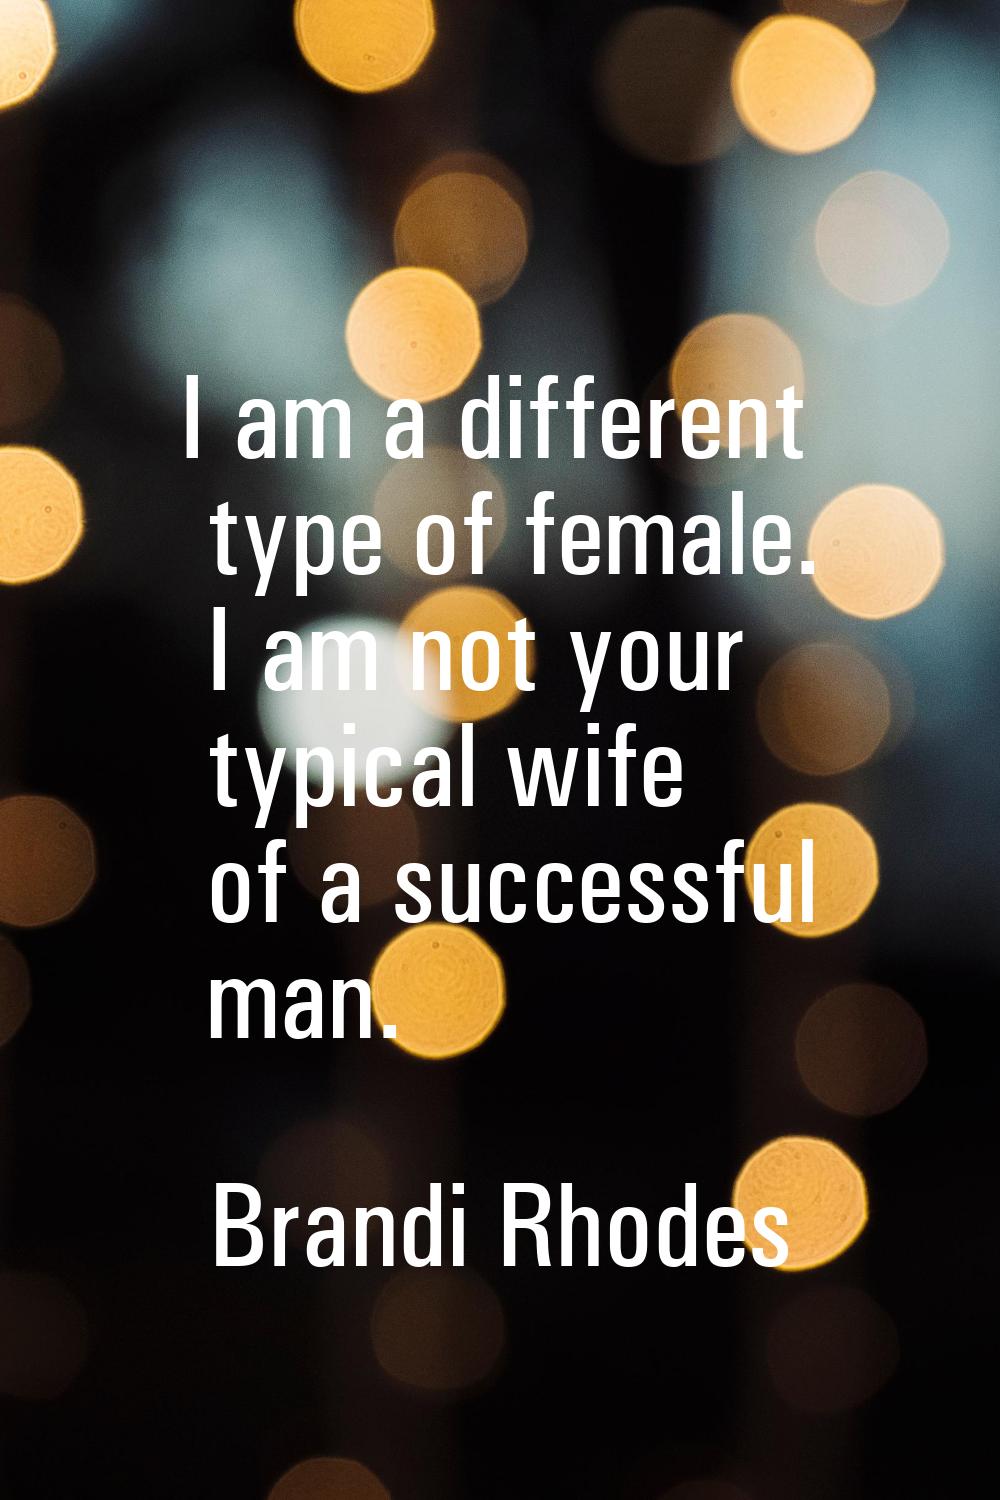 I am a different type of female. I am not your typical wife of a successful man.